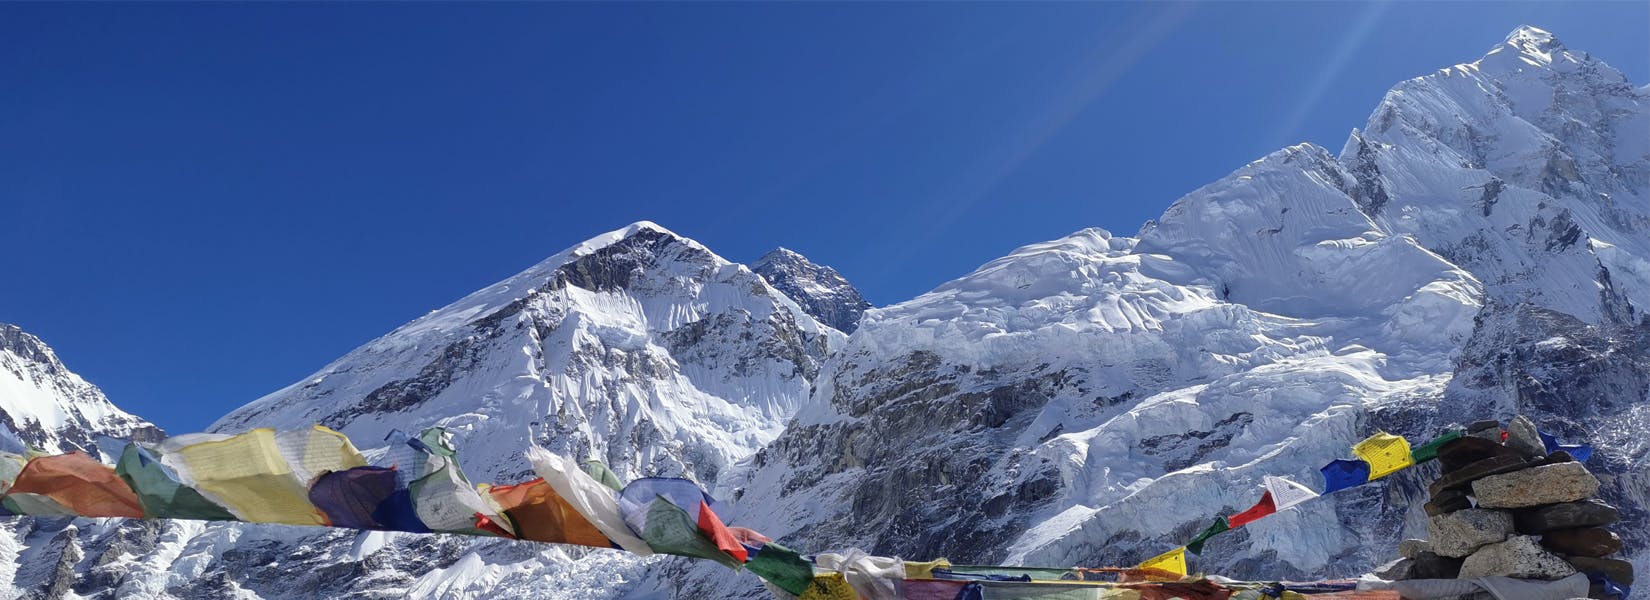 Everest Base Camp Trek Itinerary, Guidelines and Flight with Best Seasons